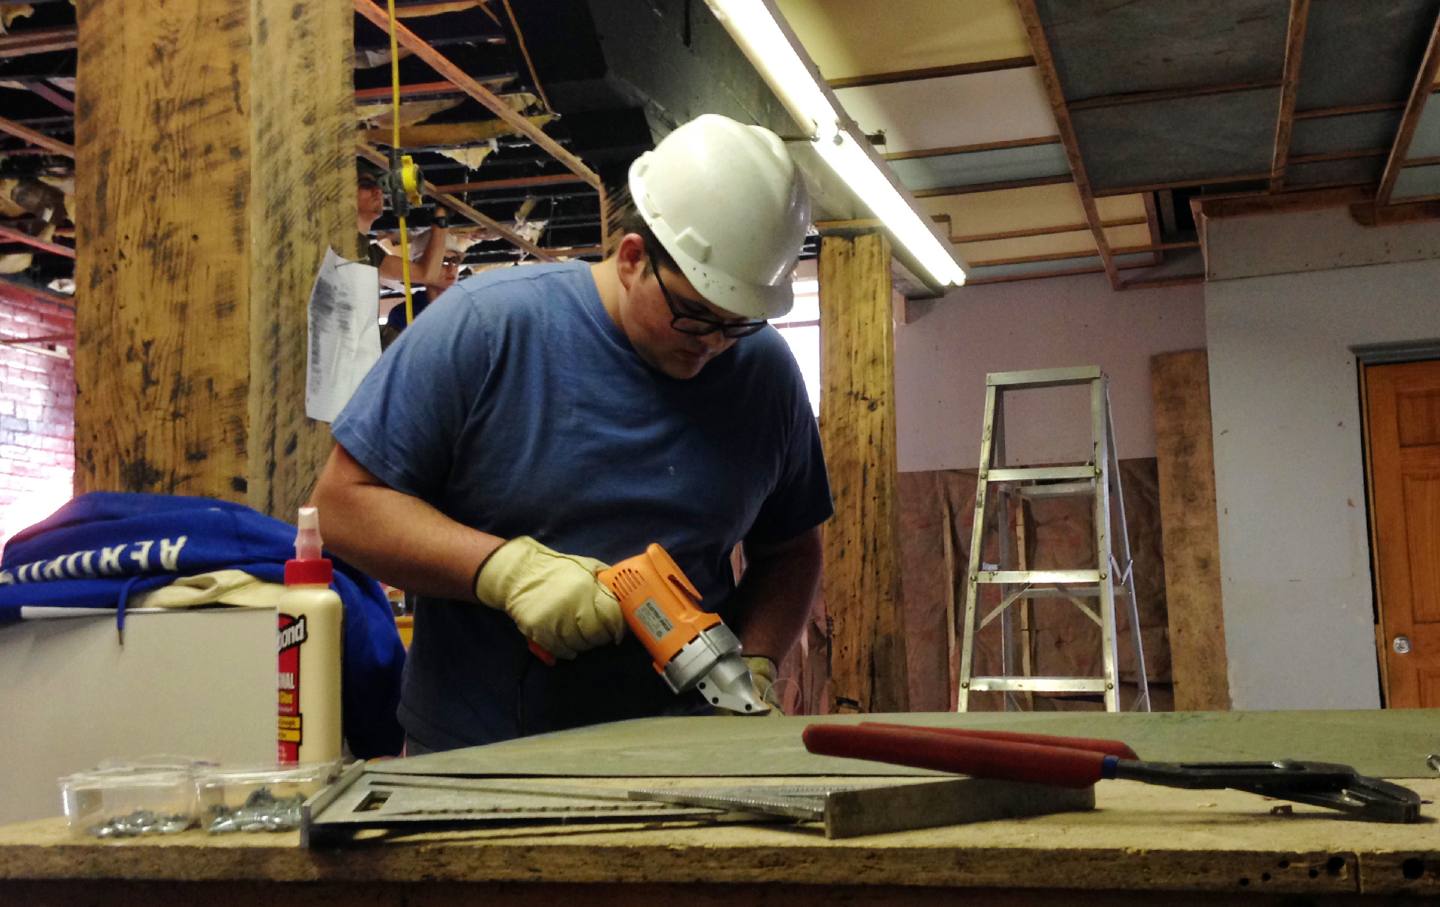 Nathaniel Blankenship, a crew member in a job program with Coalfield Development Corporation, works to remodel a 1920s-era warehouse into office space in Williamson, West Virginia.